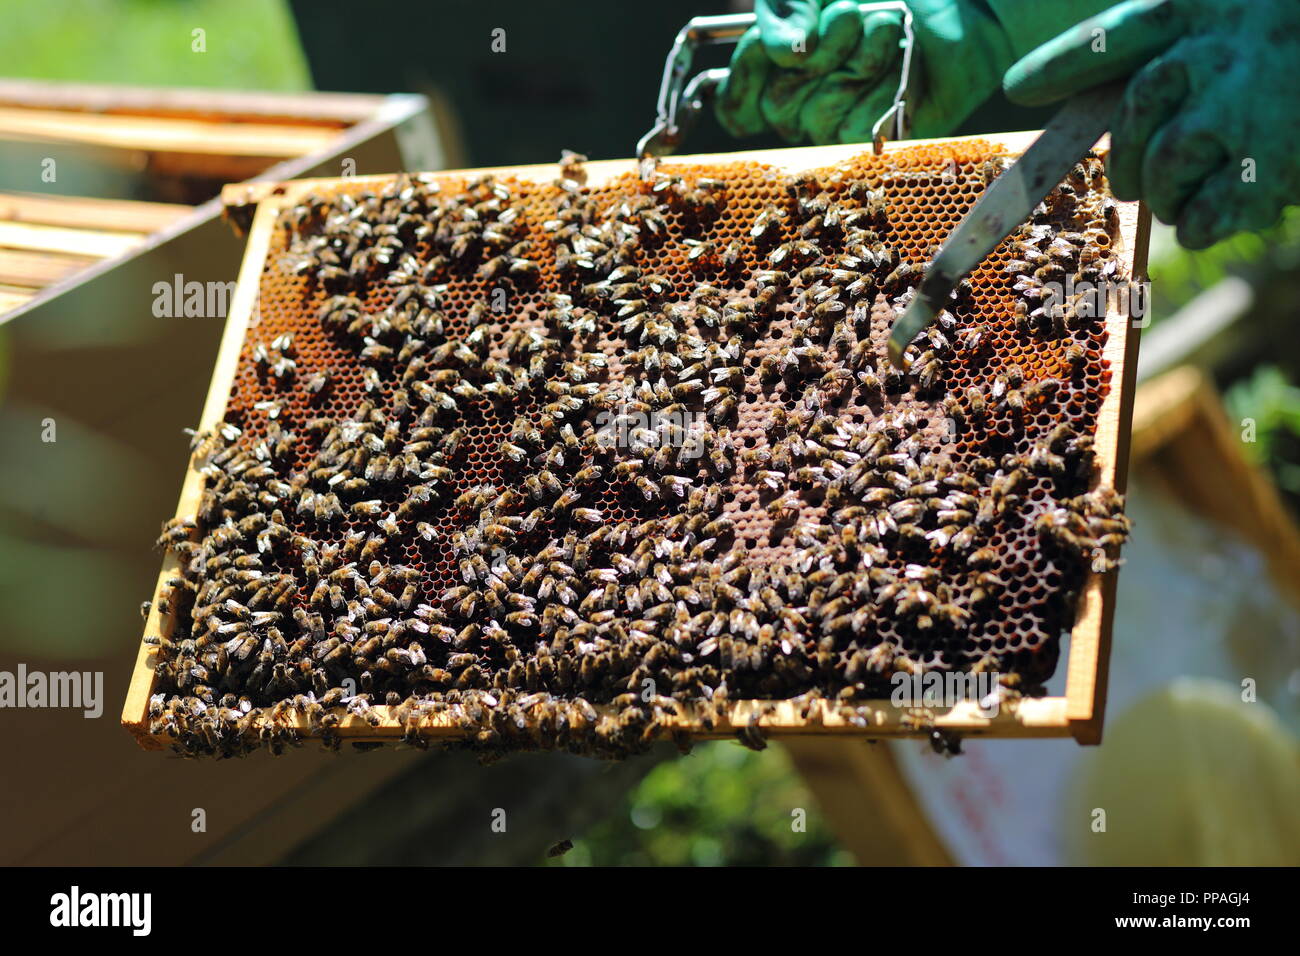 Hive frame covered in honeybees, held by beekeeper wearing safety gloves. Photo taken in Brescia, Italy. Stock Photo